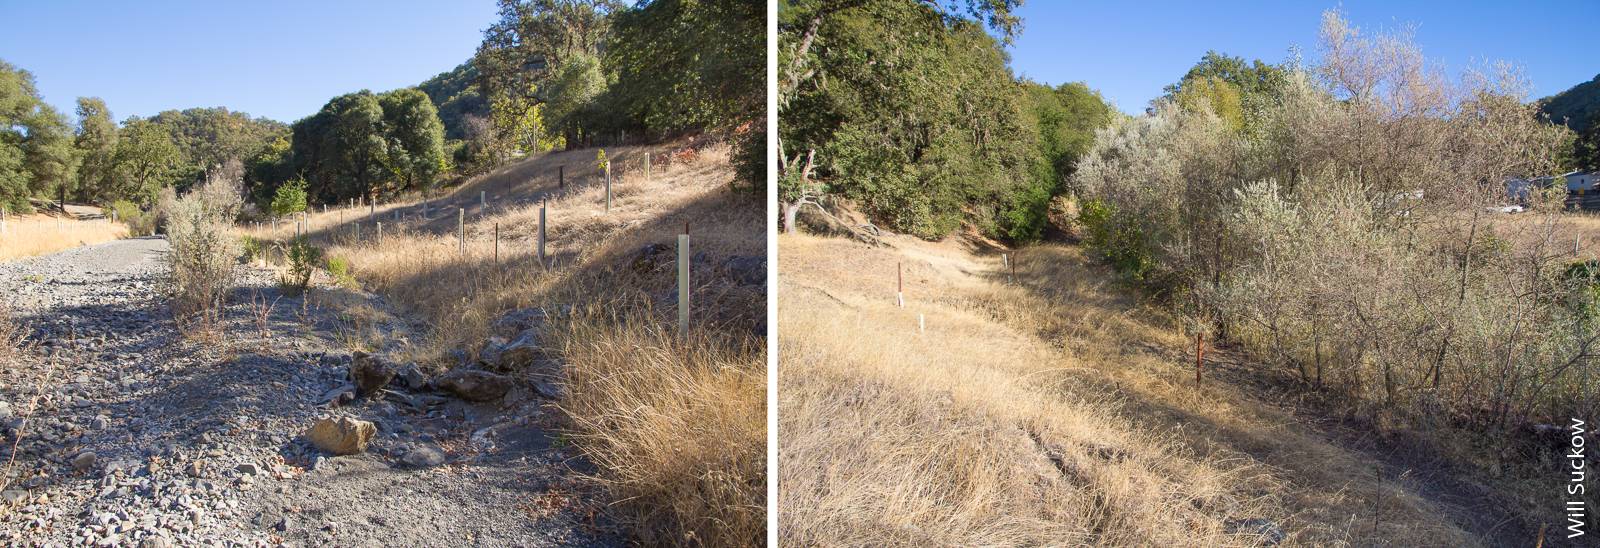 Long-term study sites on Parson's Creek at Hopland REC show the effect of deer herbivory on the recovery of natural cover in a degraded riparian zone. A site not protected from deer, left, has virtually no woody vegetation. By contrast, a site fenced in the 1980s, right, is now densely vegetated, providing shade and helping to form pools, both of which benefit fish.